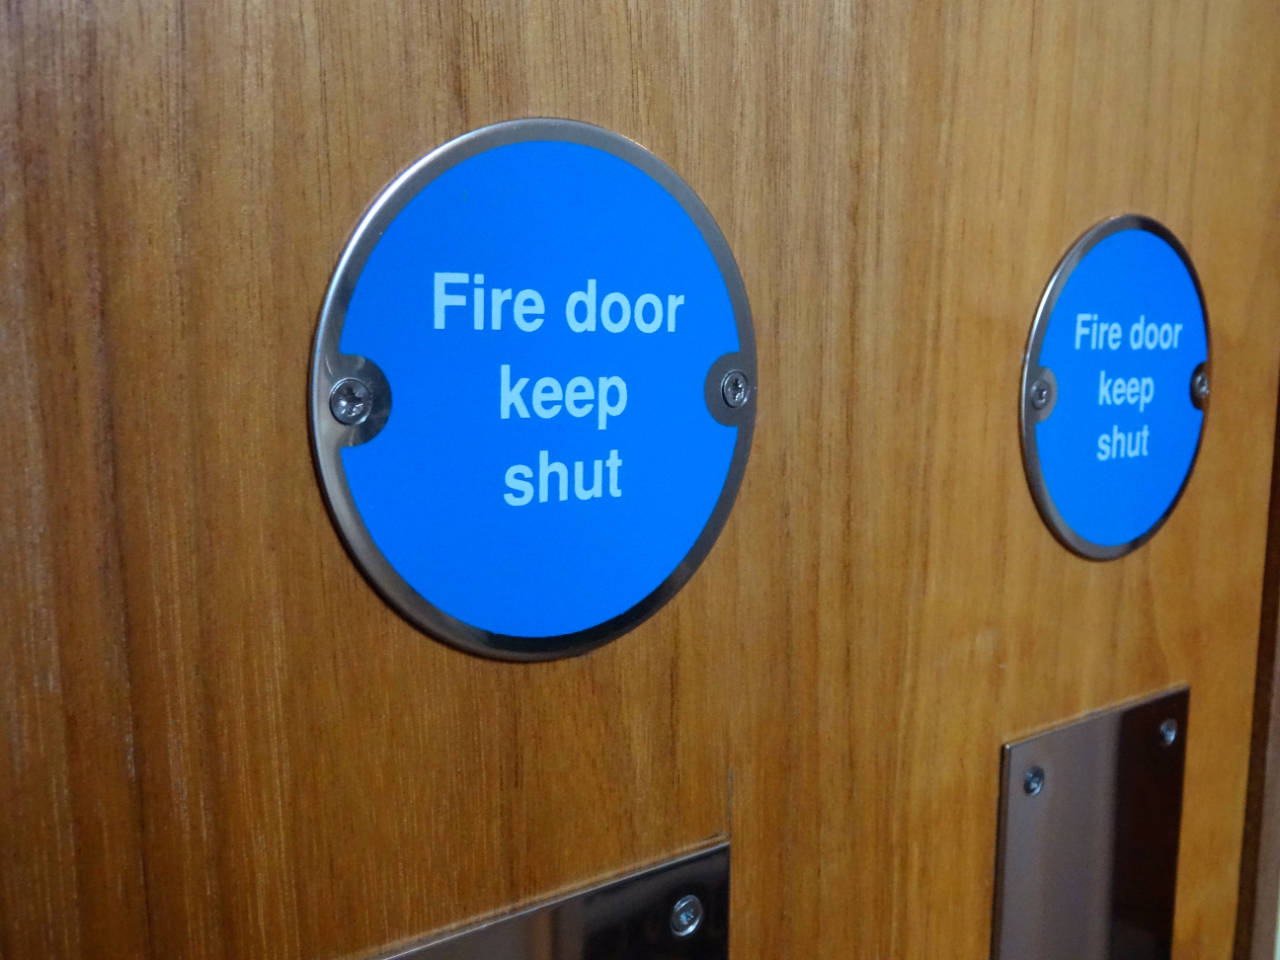 Fire door regulations – Photo showing a circular blue sign with white writing saying 'Fire Door Keep Shut '.